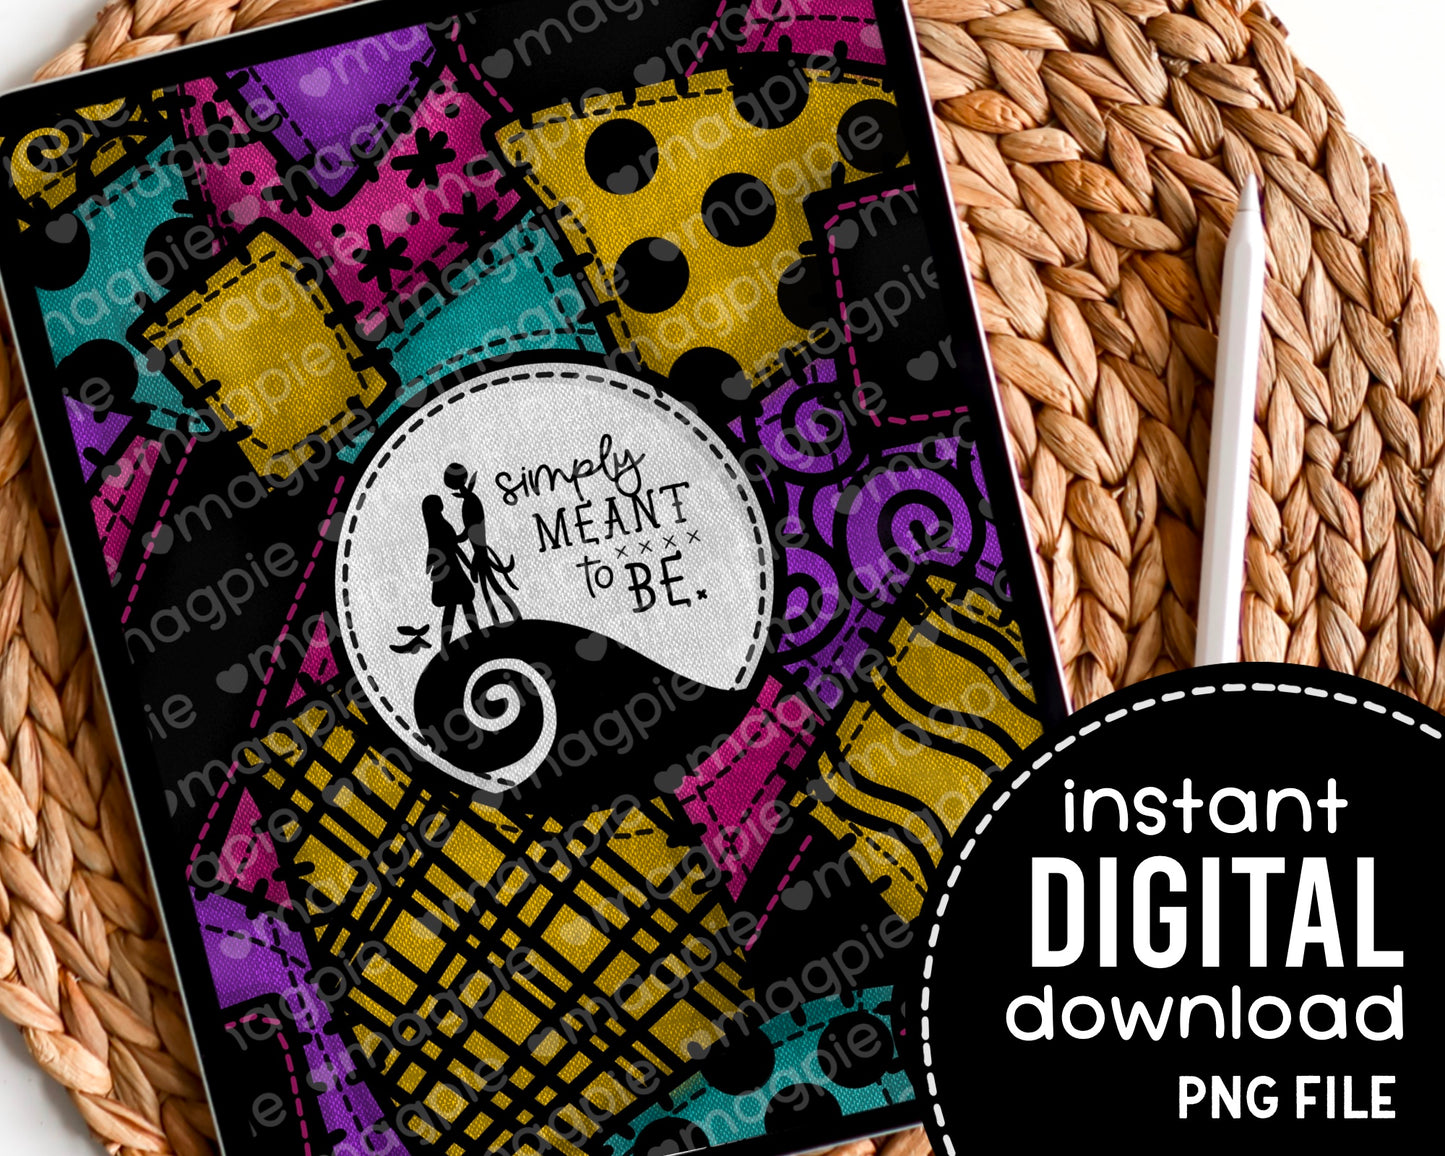 Simply Meant to Be Halloween Digital Pattern Paper